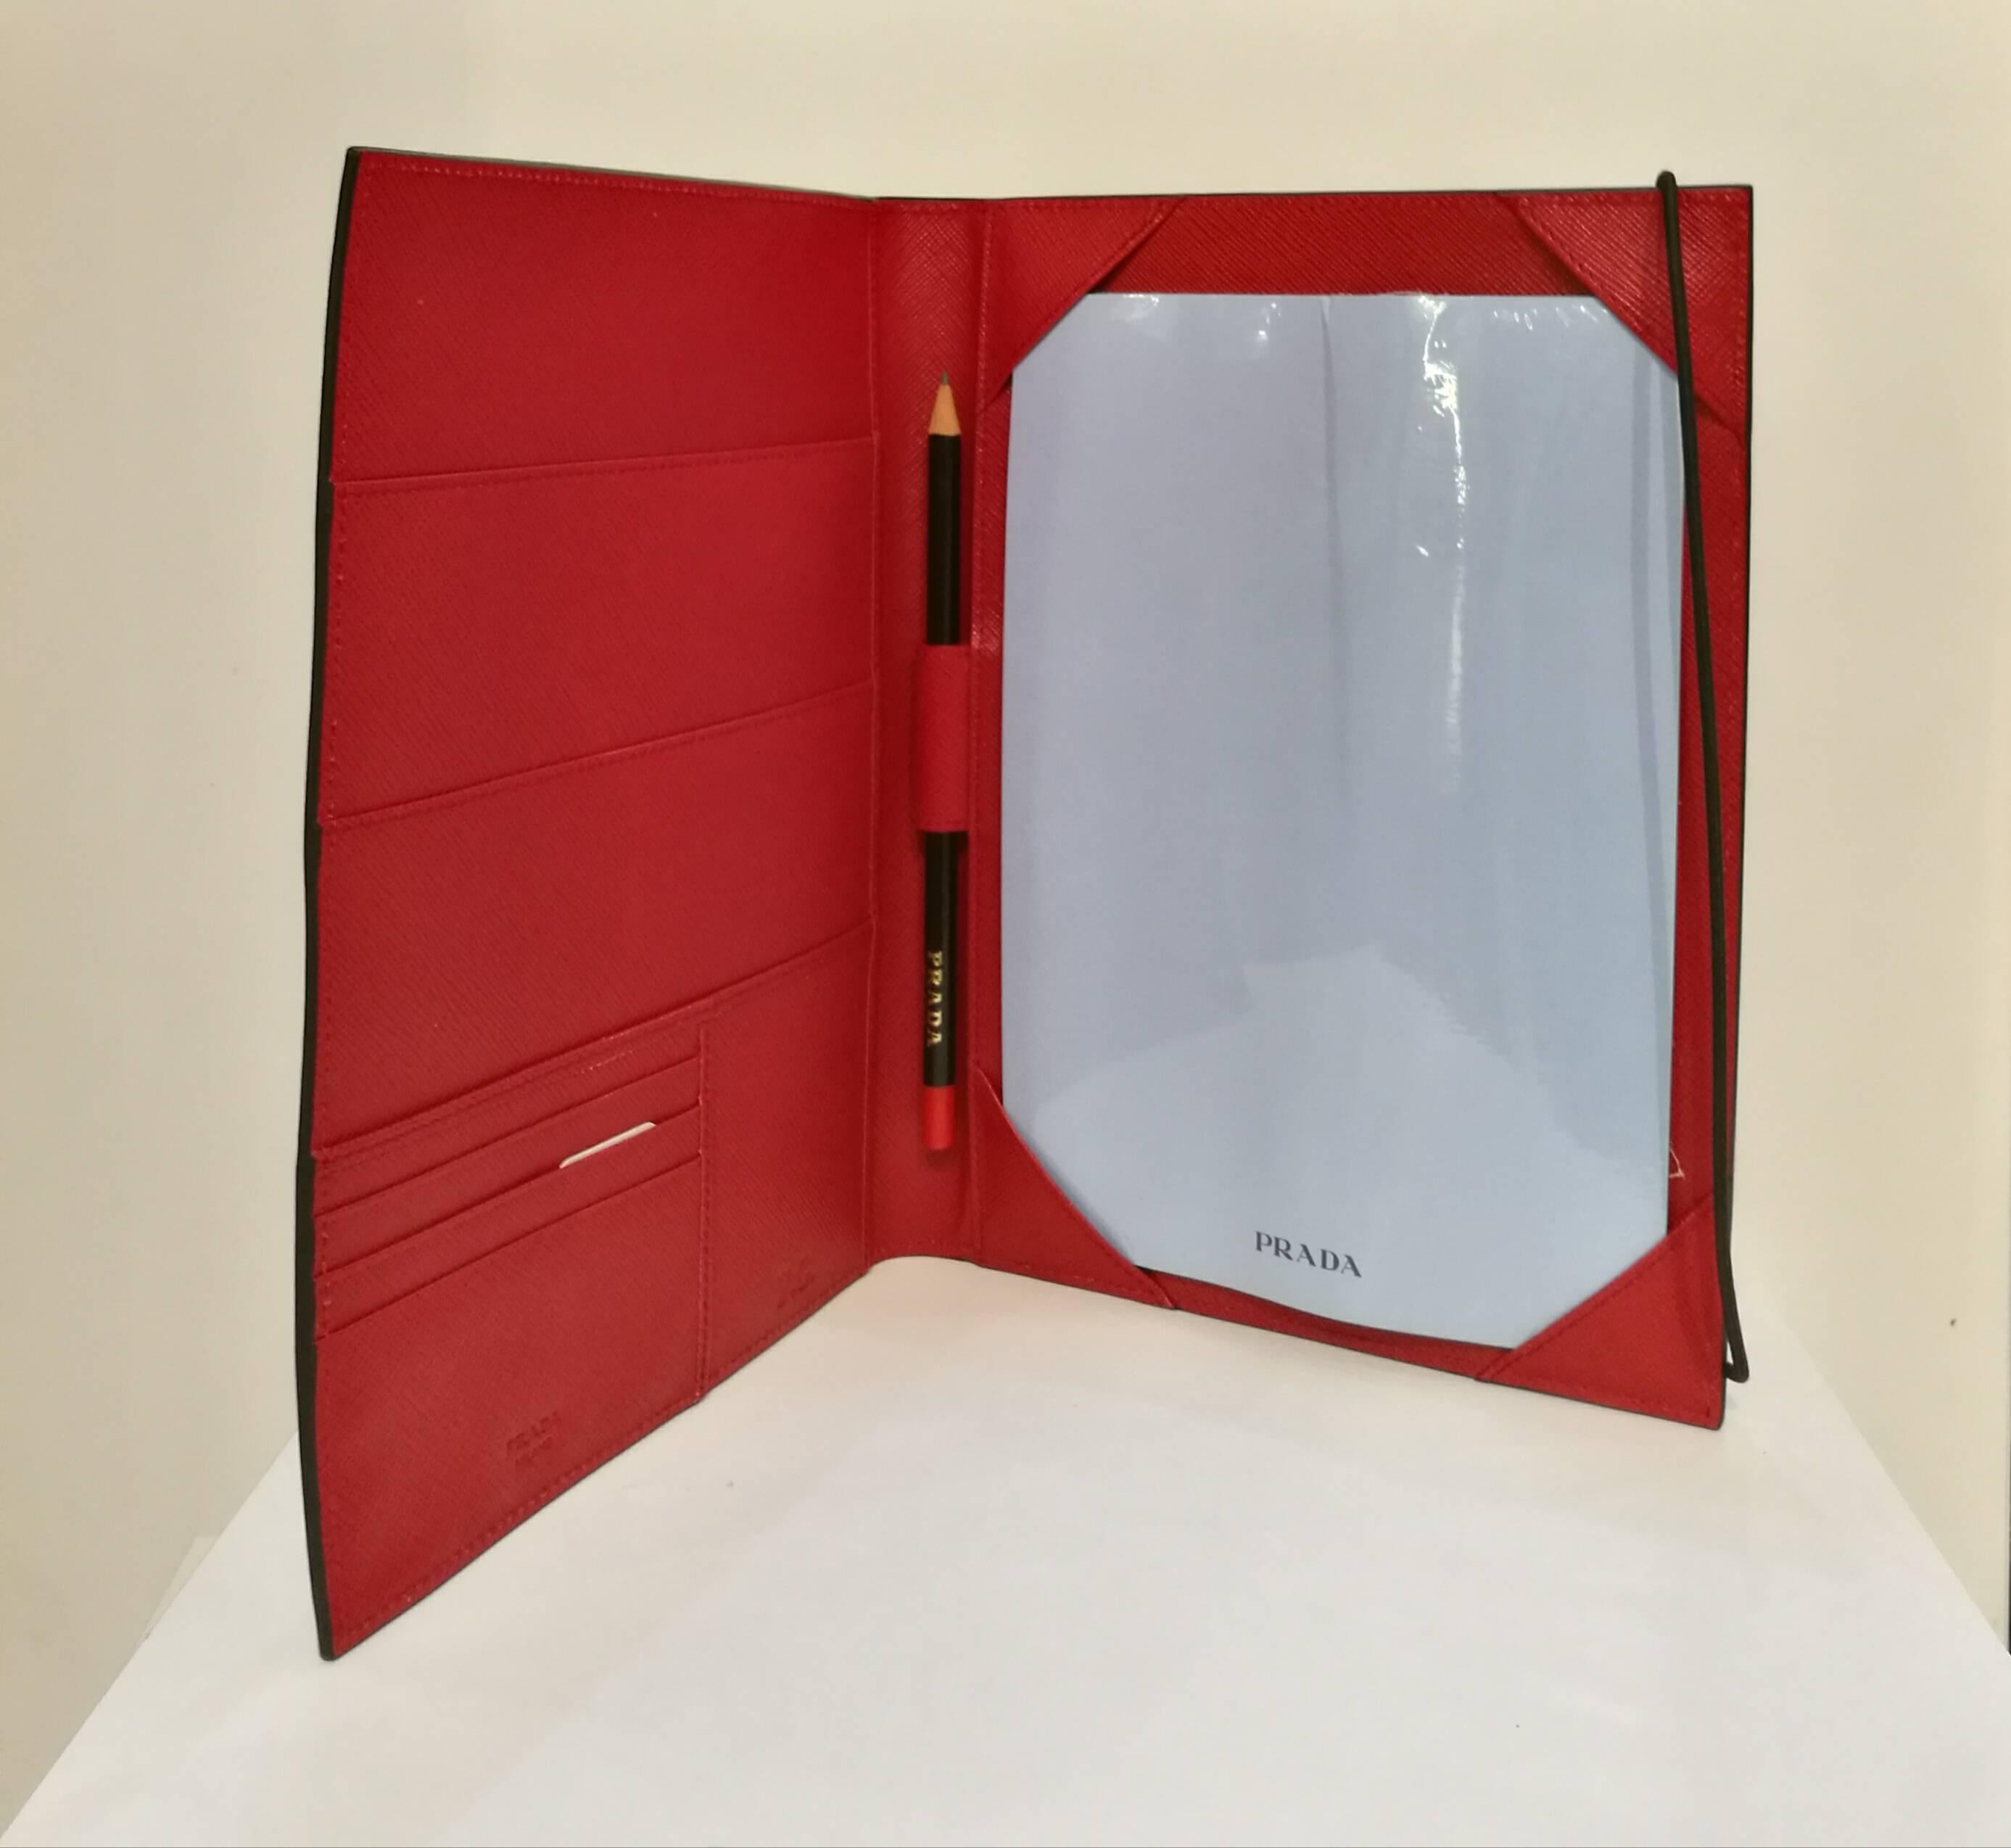 Prada Black Leather Memo book
100% leather
inside red leather